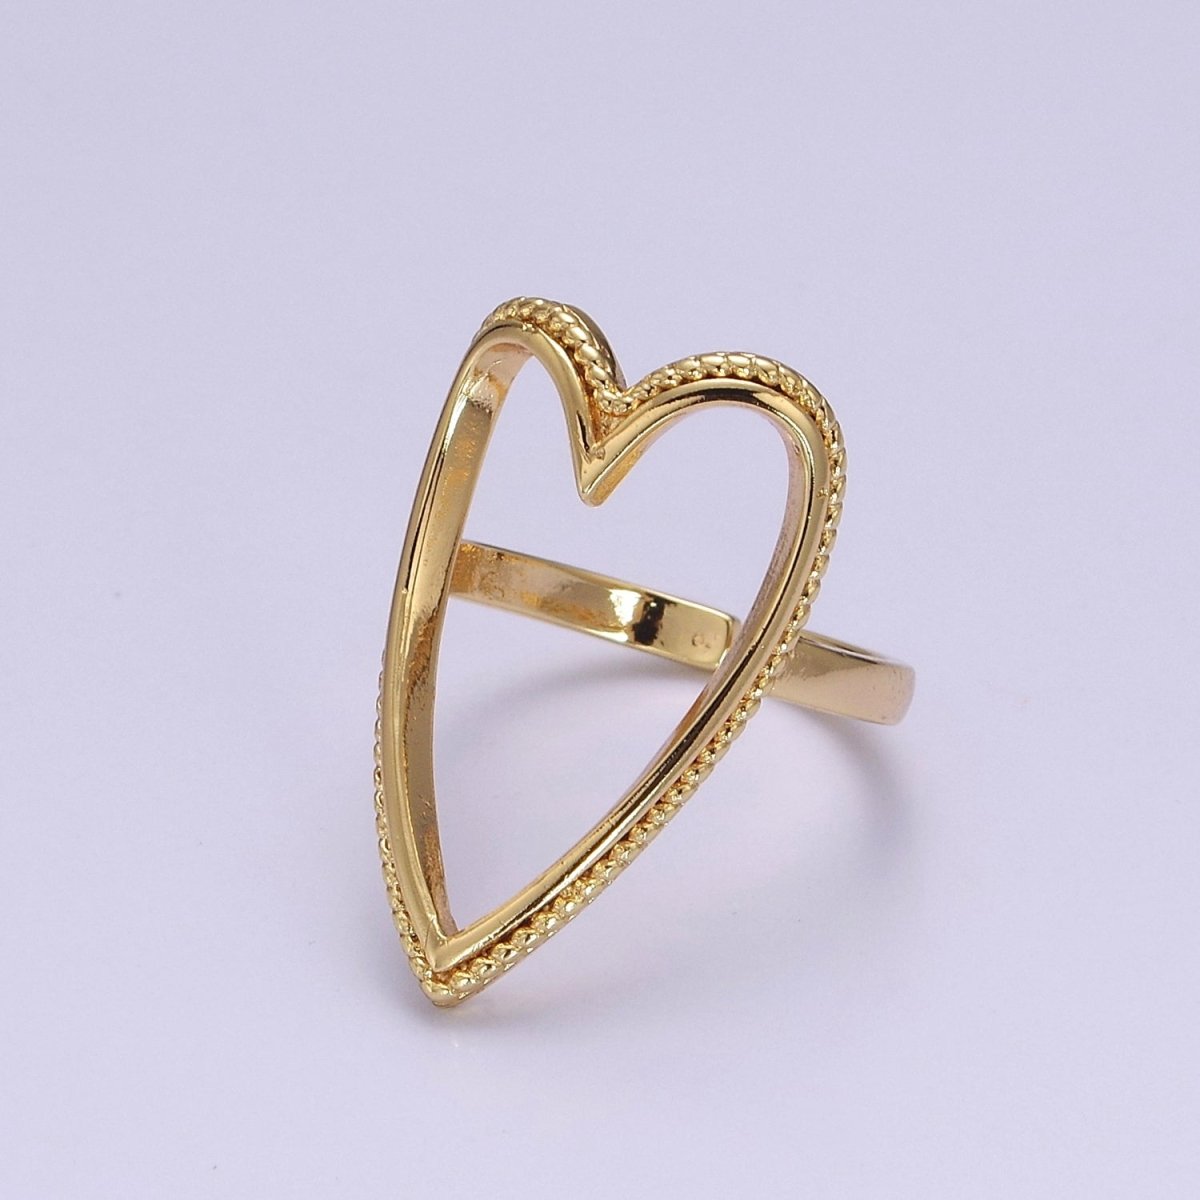 OS Open Heart Ring, Heart Cut Out Ring, Everyday Ring 18K Gold Filled Ring, Fun Unique Cute Ring For Women O-2081 - DLUXCA